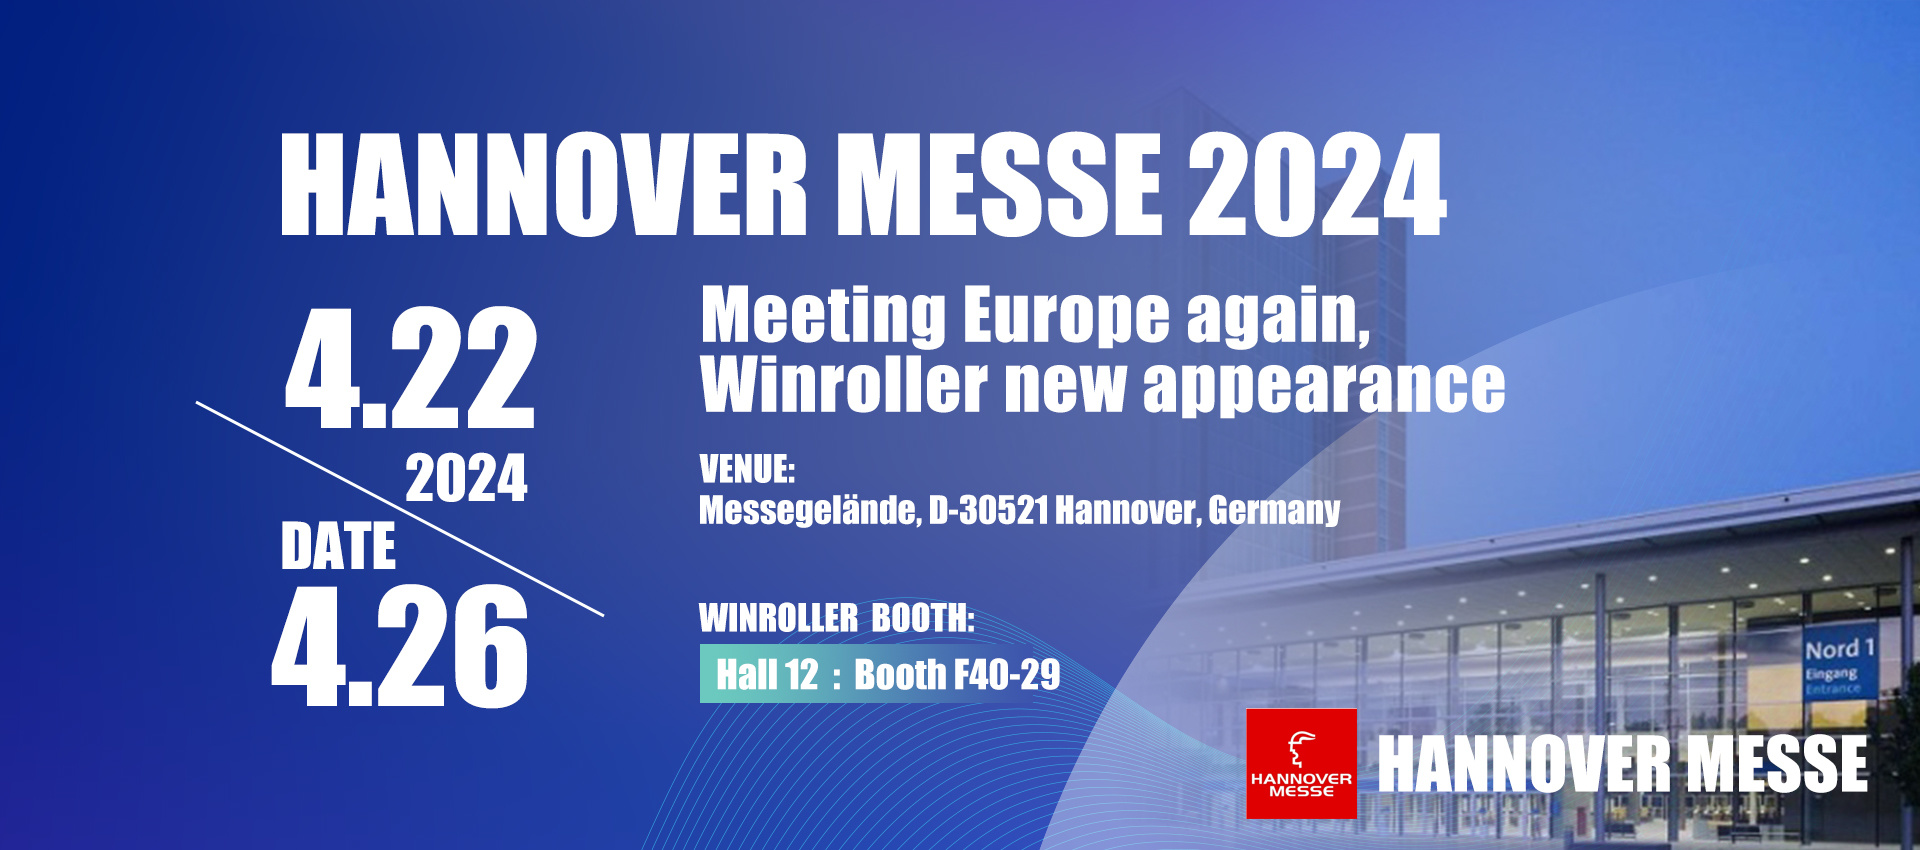 Meeting Europe again,Winroller new appearance